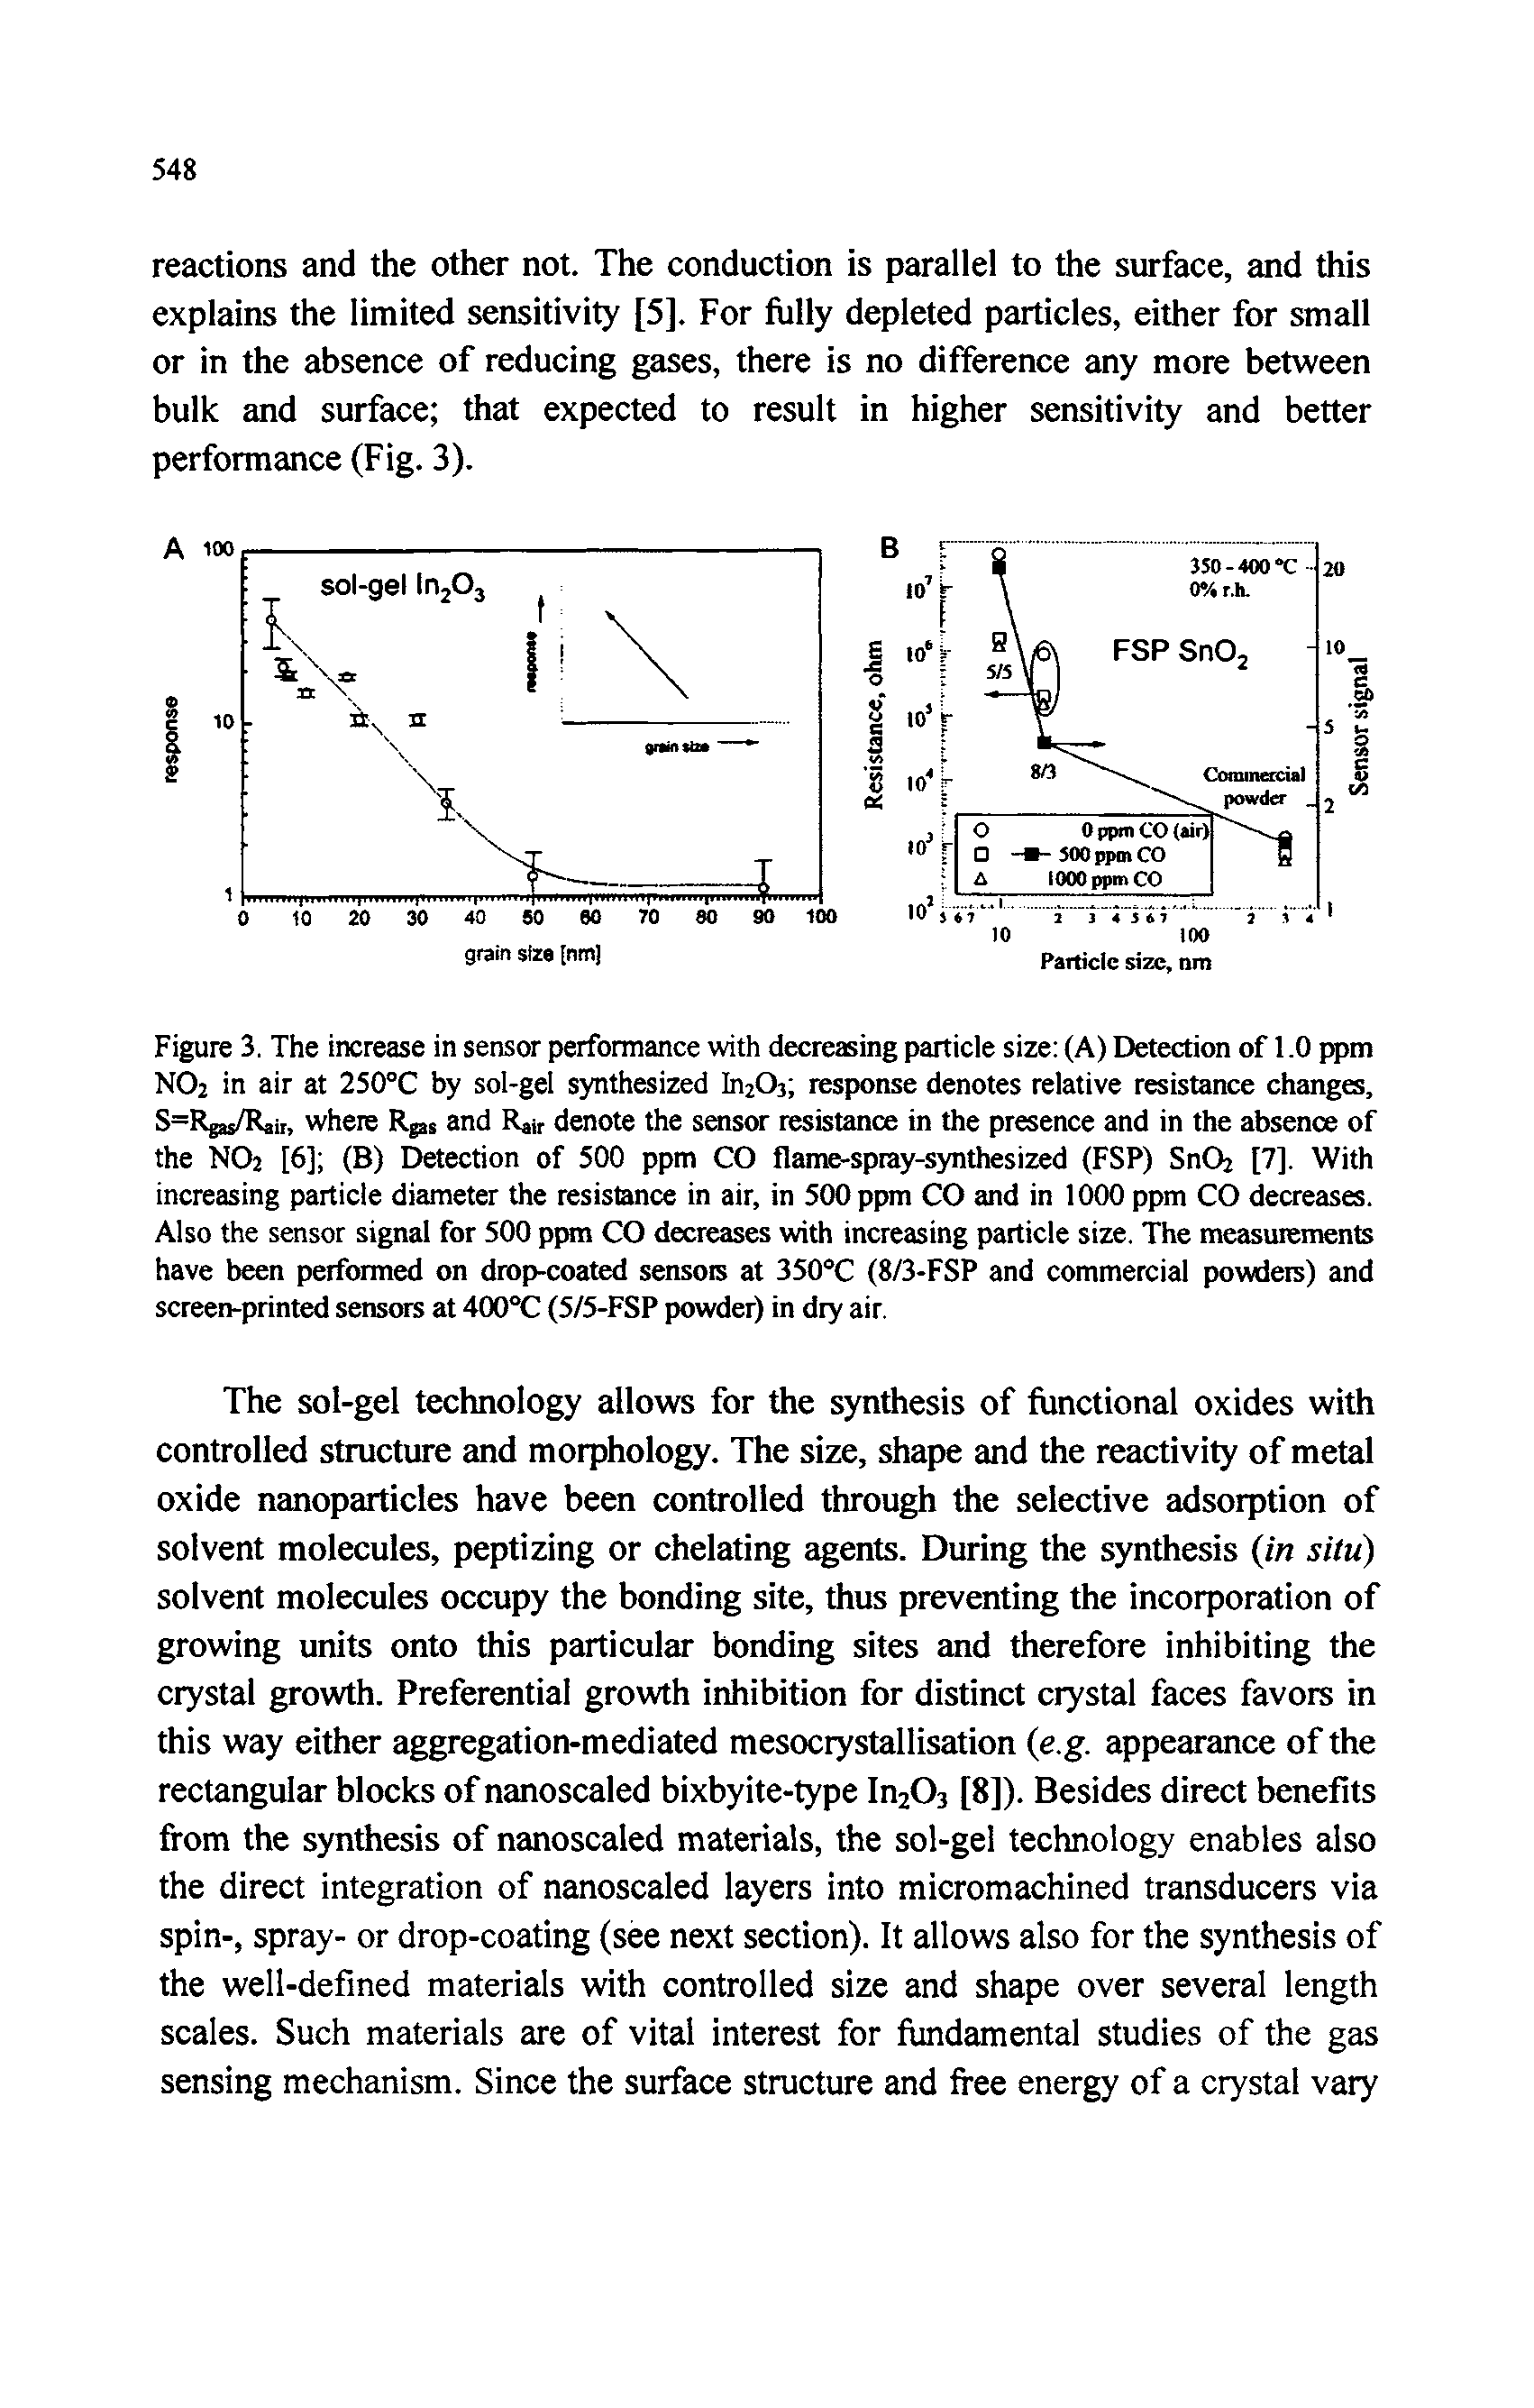 Figure 3. The increase in sensor performance with decreasing particle size (A) Detection of 1.0 ppm NO in air at 250°C by sol-gel synthesized In203 response denotes relative resistance changes, S=Rjas/Rair, wheiB Rgas and Rair denote the sensor resistance in the presence and in the absence of the NO [6] (B) Detection of 500 ppm CO flame-spray-synthesized (FSP) SnO [7]. With increasing particle diameter the resistance in air, in 500 ppm CO and in 1000 ppm CO decreases. Also the sensor signal for 500 ppm CO decreases with increasing particle size. The measurements have been performed on drop-coated sensors at 350°C (8/3-FSP and commercial powders) and screen-printed sensors at 400°C (5/5-FSP powder) in dry air.